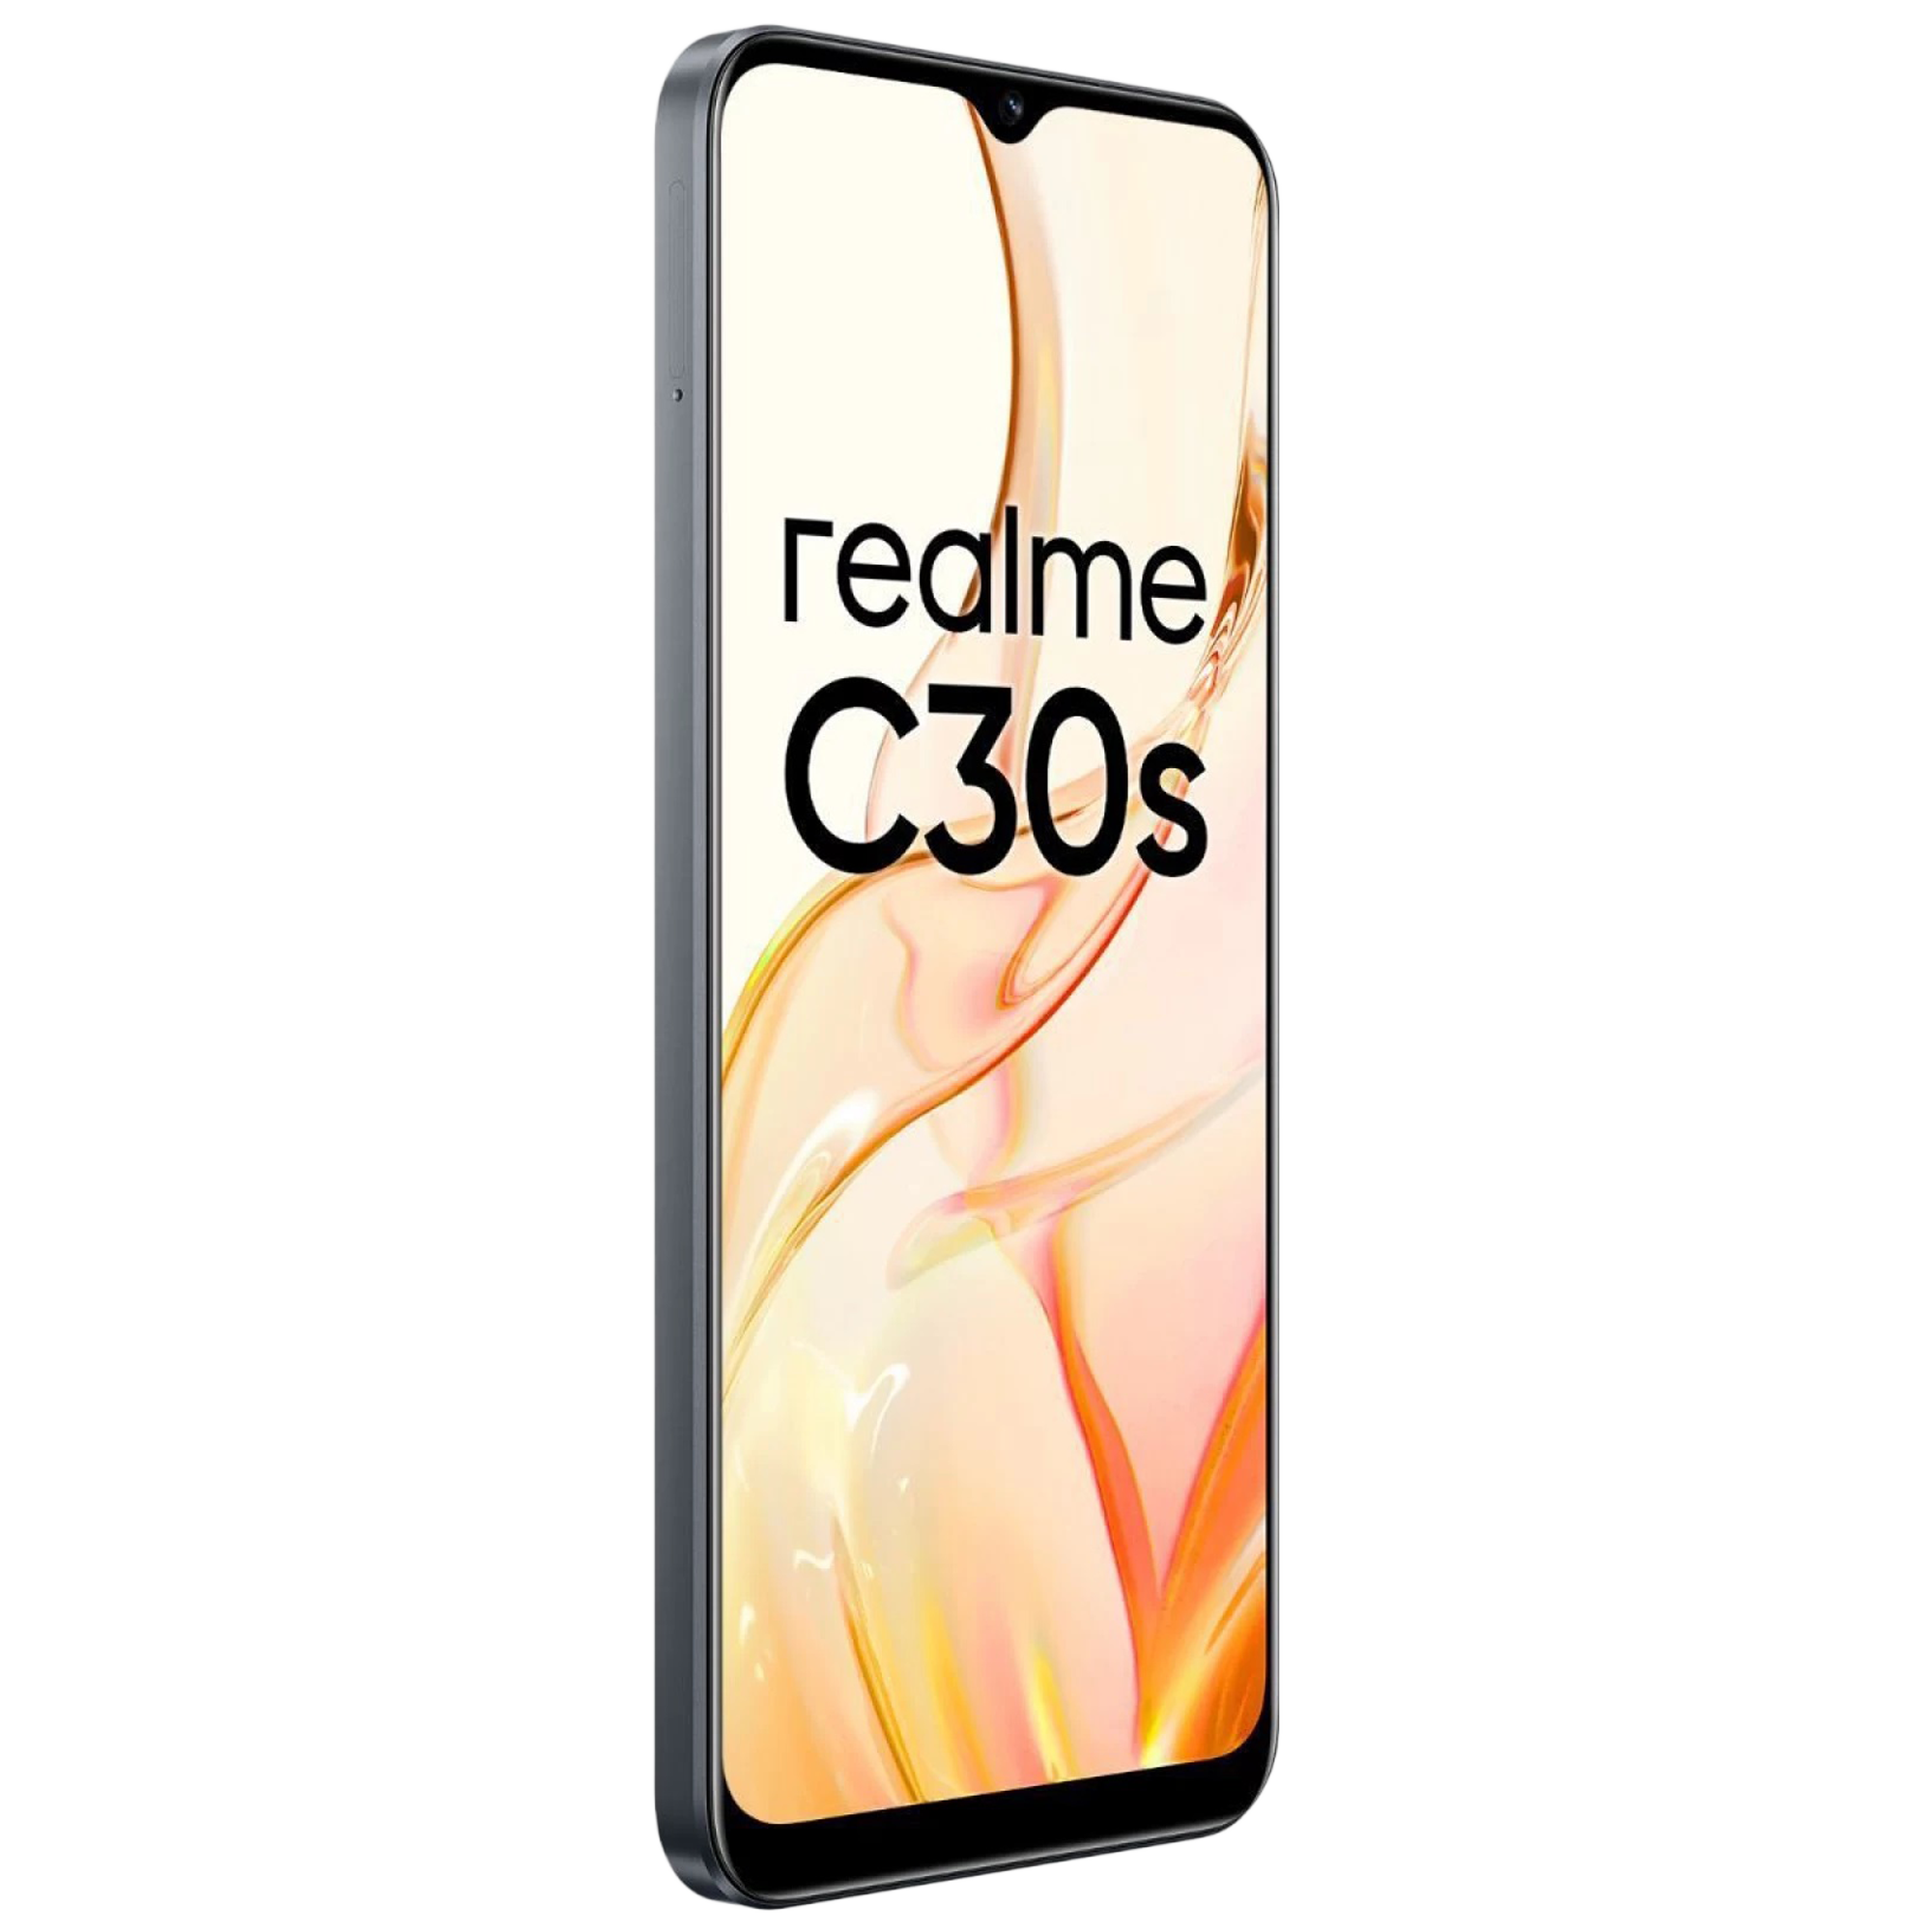 Buy Realme C30s 4gb Ram 64gb Stripe Black With 10w Fast Charger Online Croma 0302